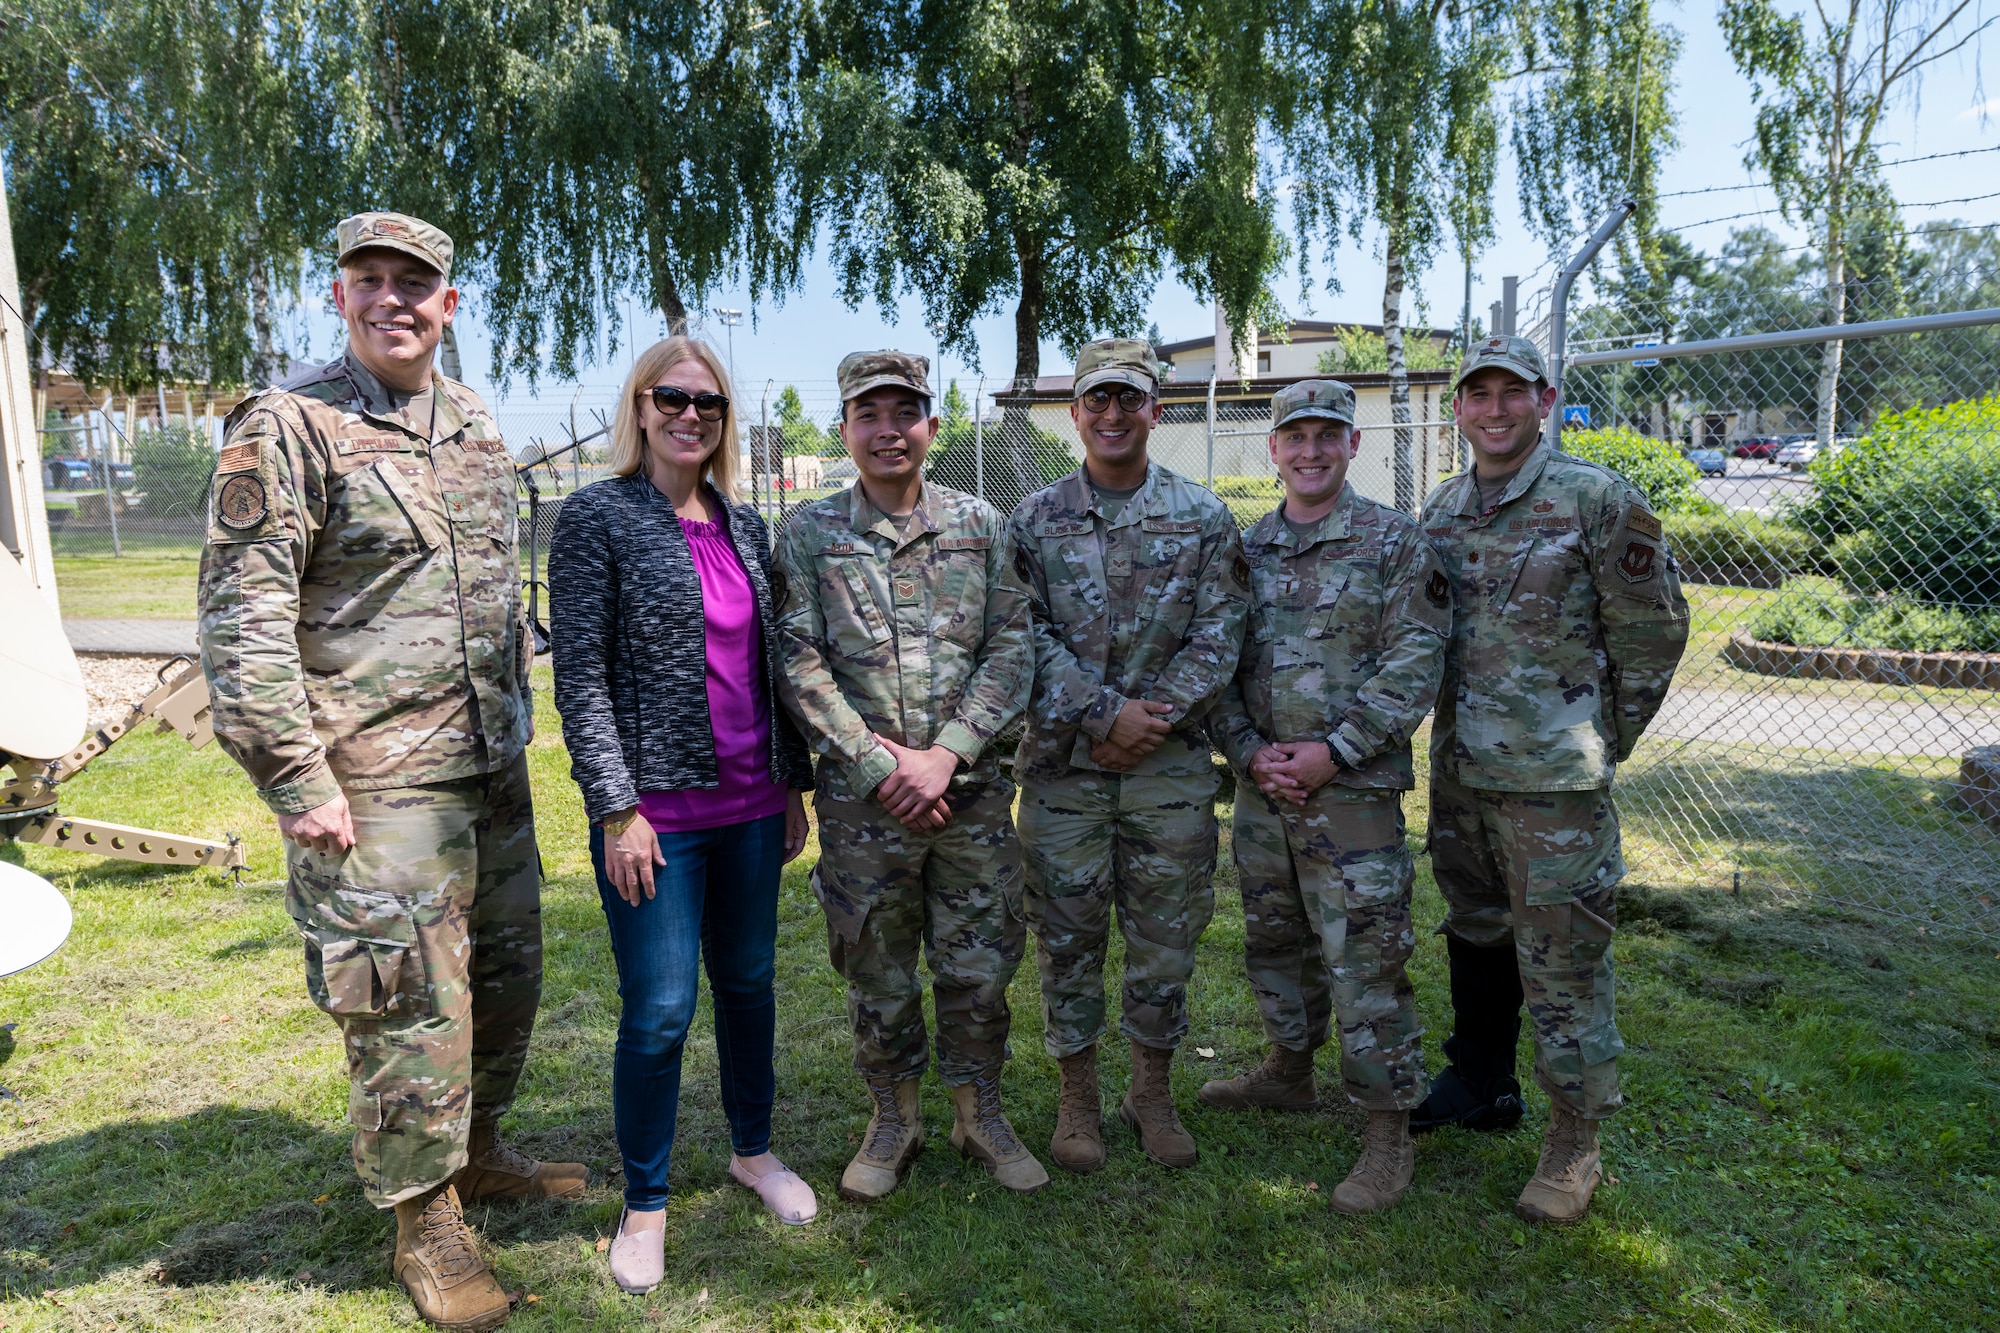 U.S. Air Force Airmen from the 52nd Communications Squadron take a photo with Lauren Knausenberger, U.S. Air Force chief information officer, following her visit at Spangdahlem Air Base, Germany, July 21, 2021. Knausenberger thanked the members of the 52nd CS for their diligent efforts in accelerating change in the cyber domain through Agile Combat Employment and Mission Defense Team. (U.S. Air Force photo by Senior Airman Ali Stewart)